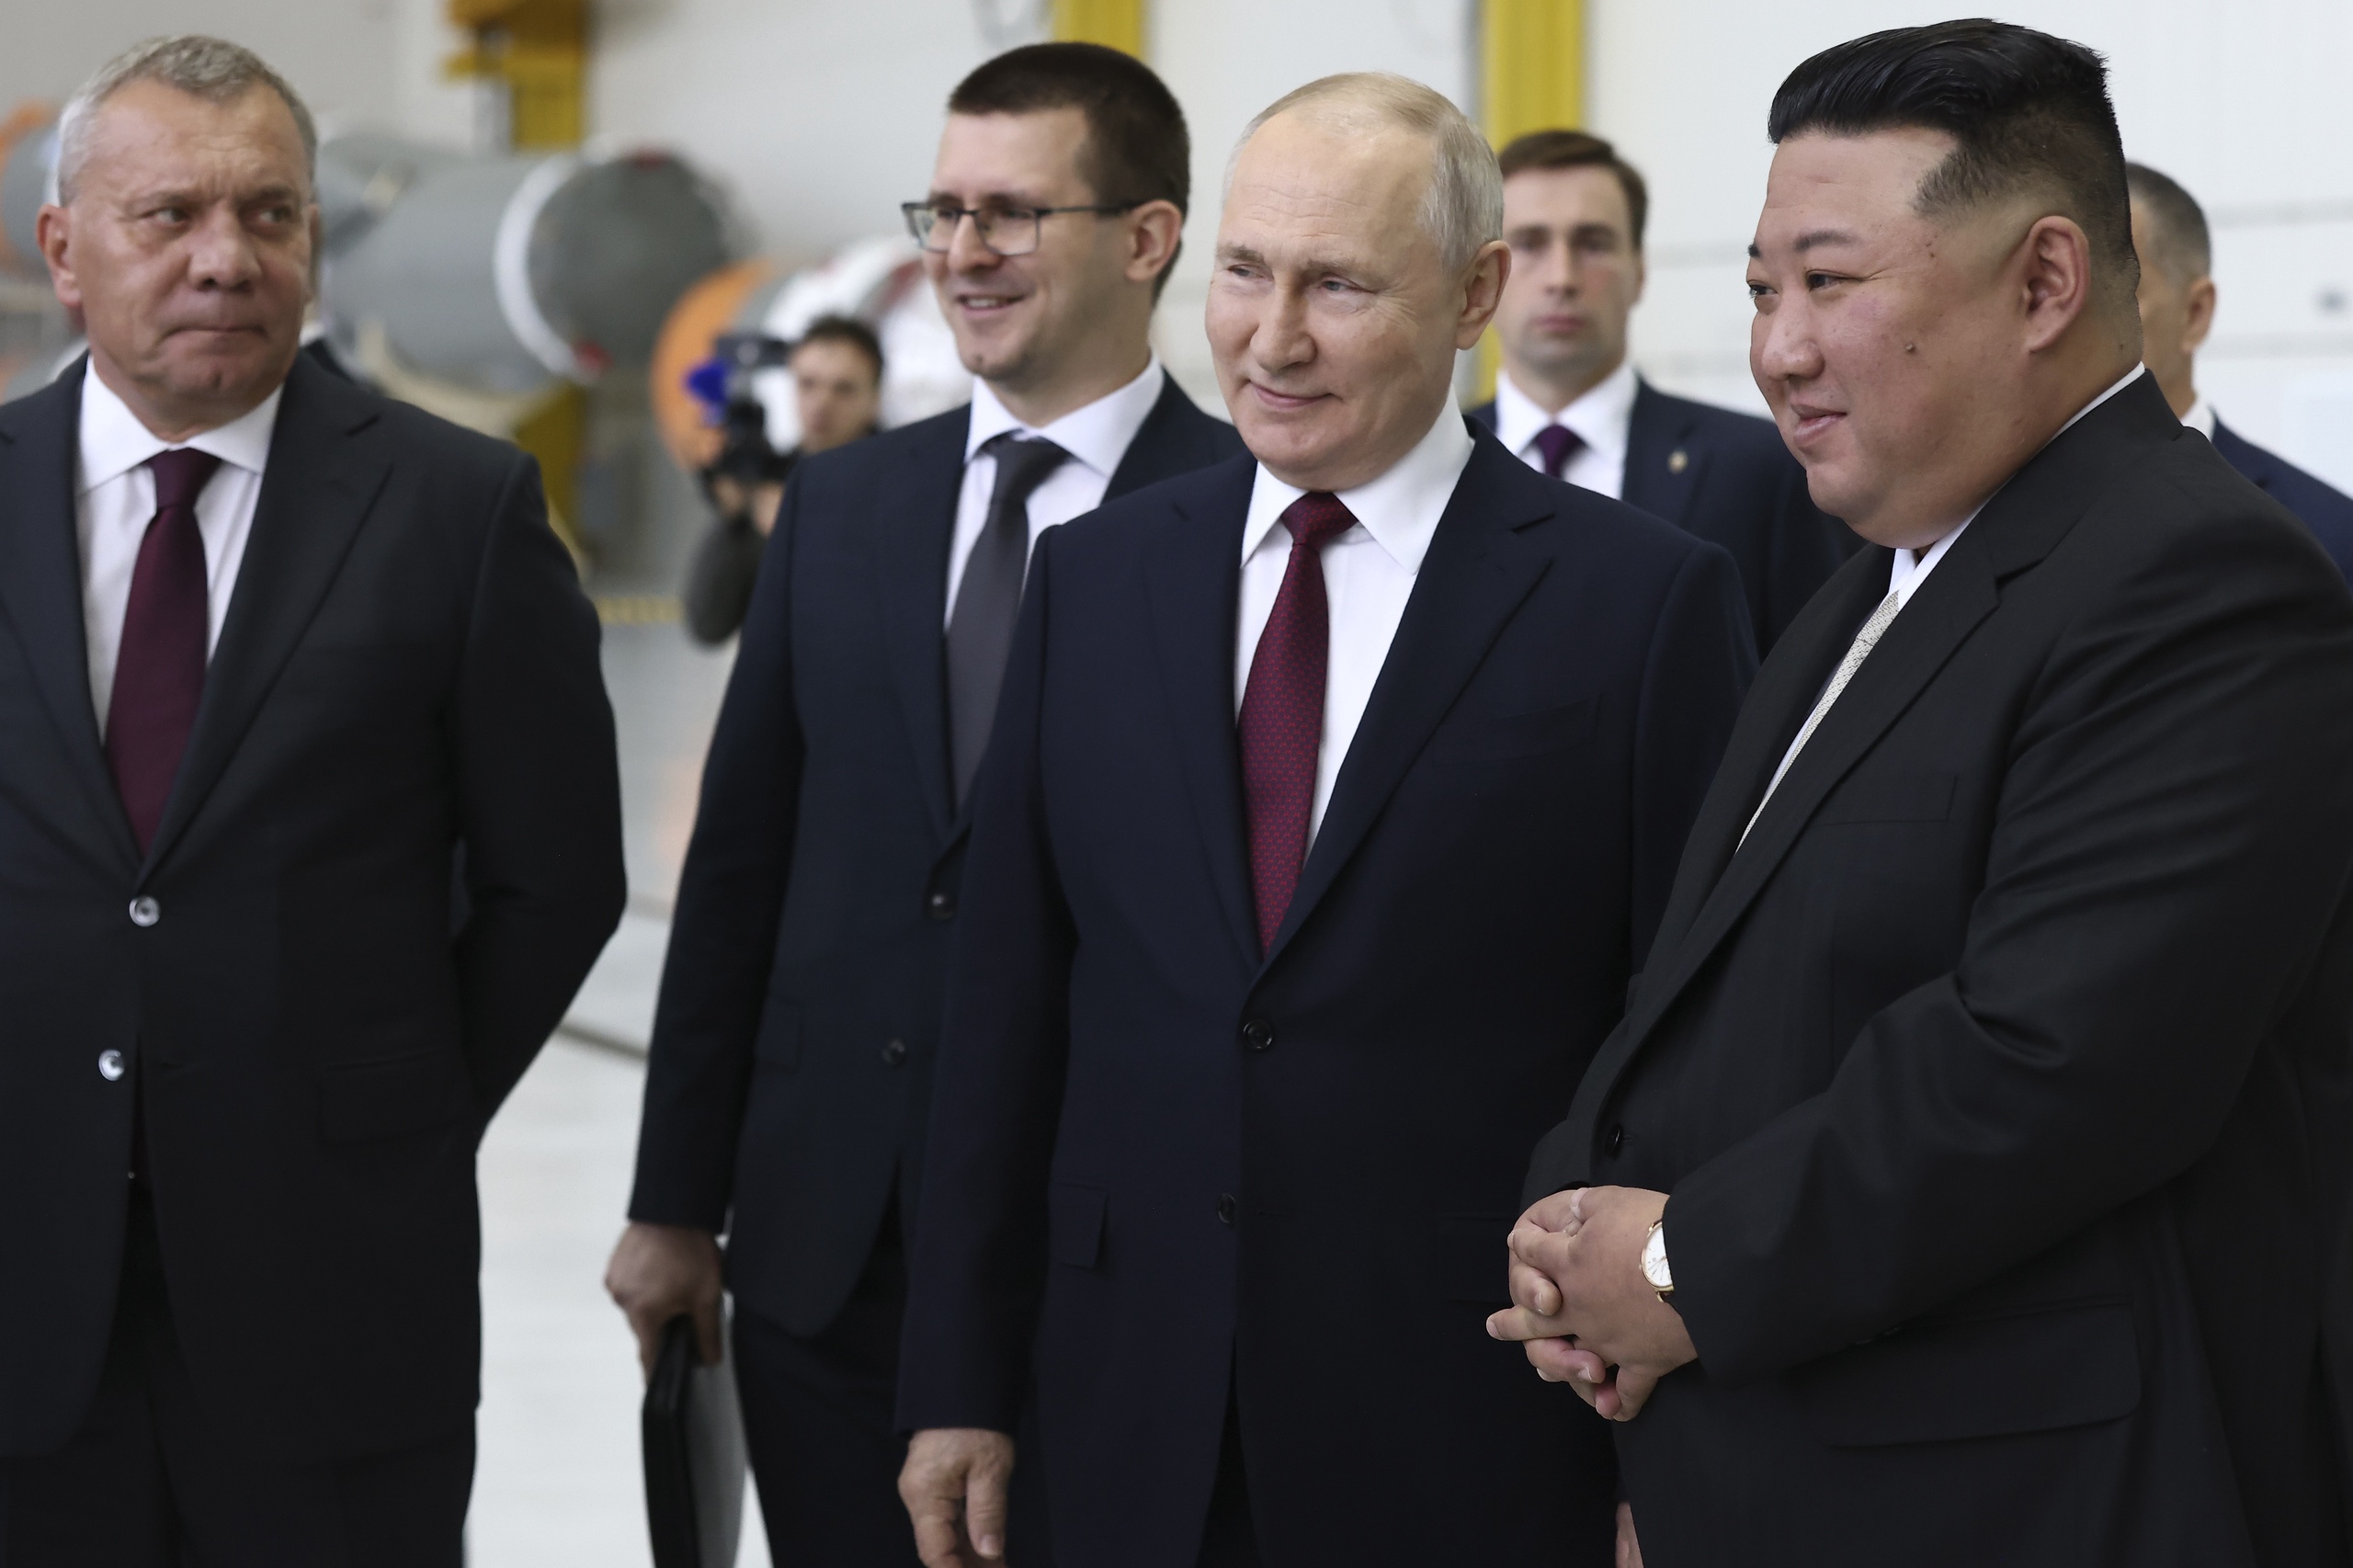 Kim Jong-un and Vladimir Putin spoke for more than two hours in Vladivostok about what the countries can do for each other.